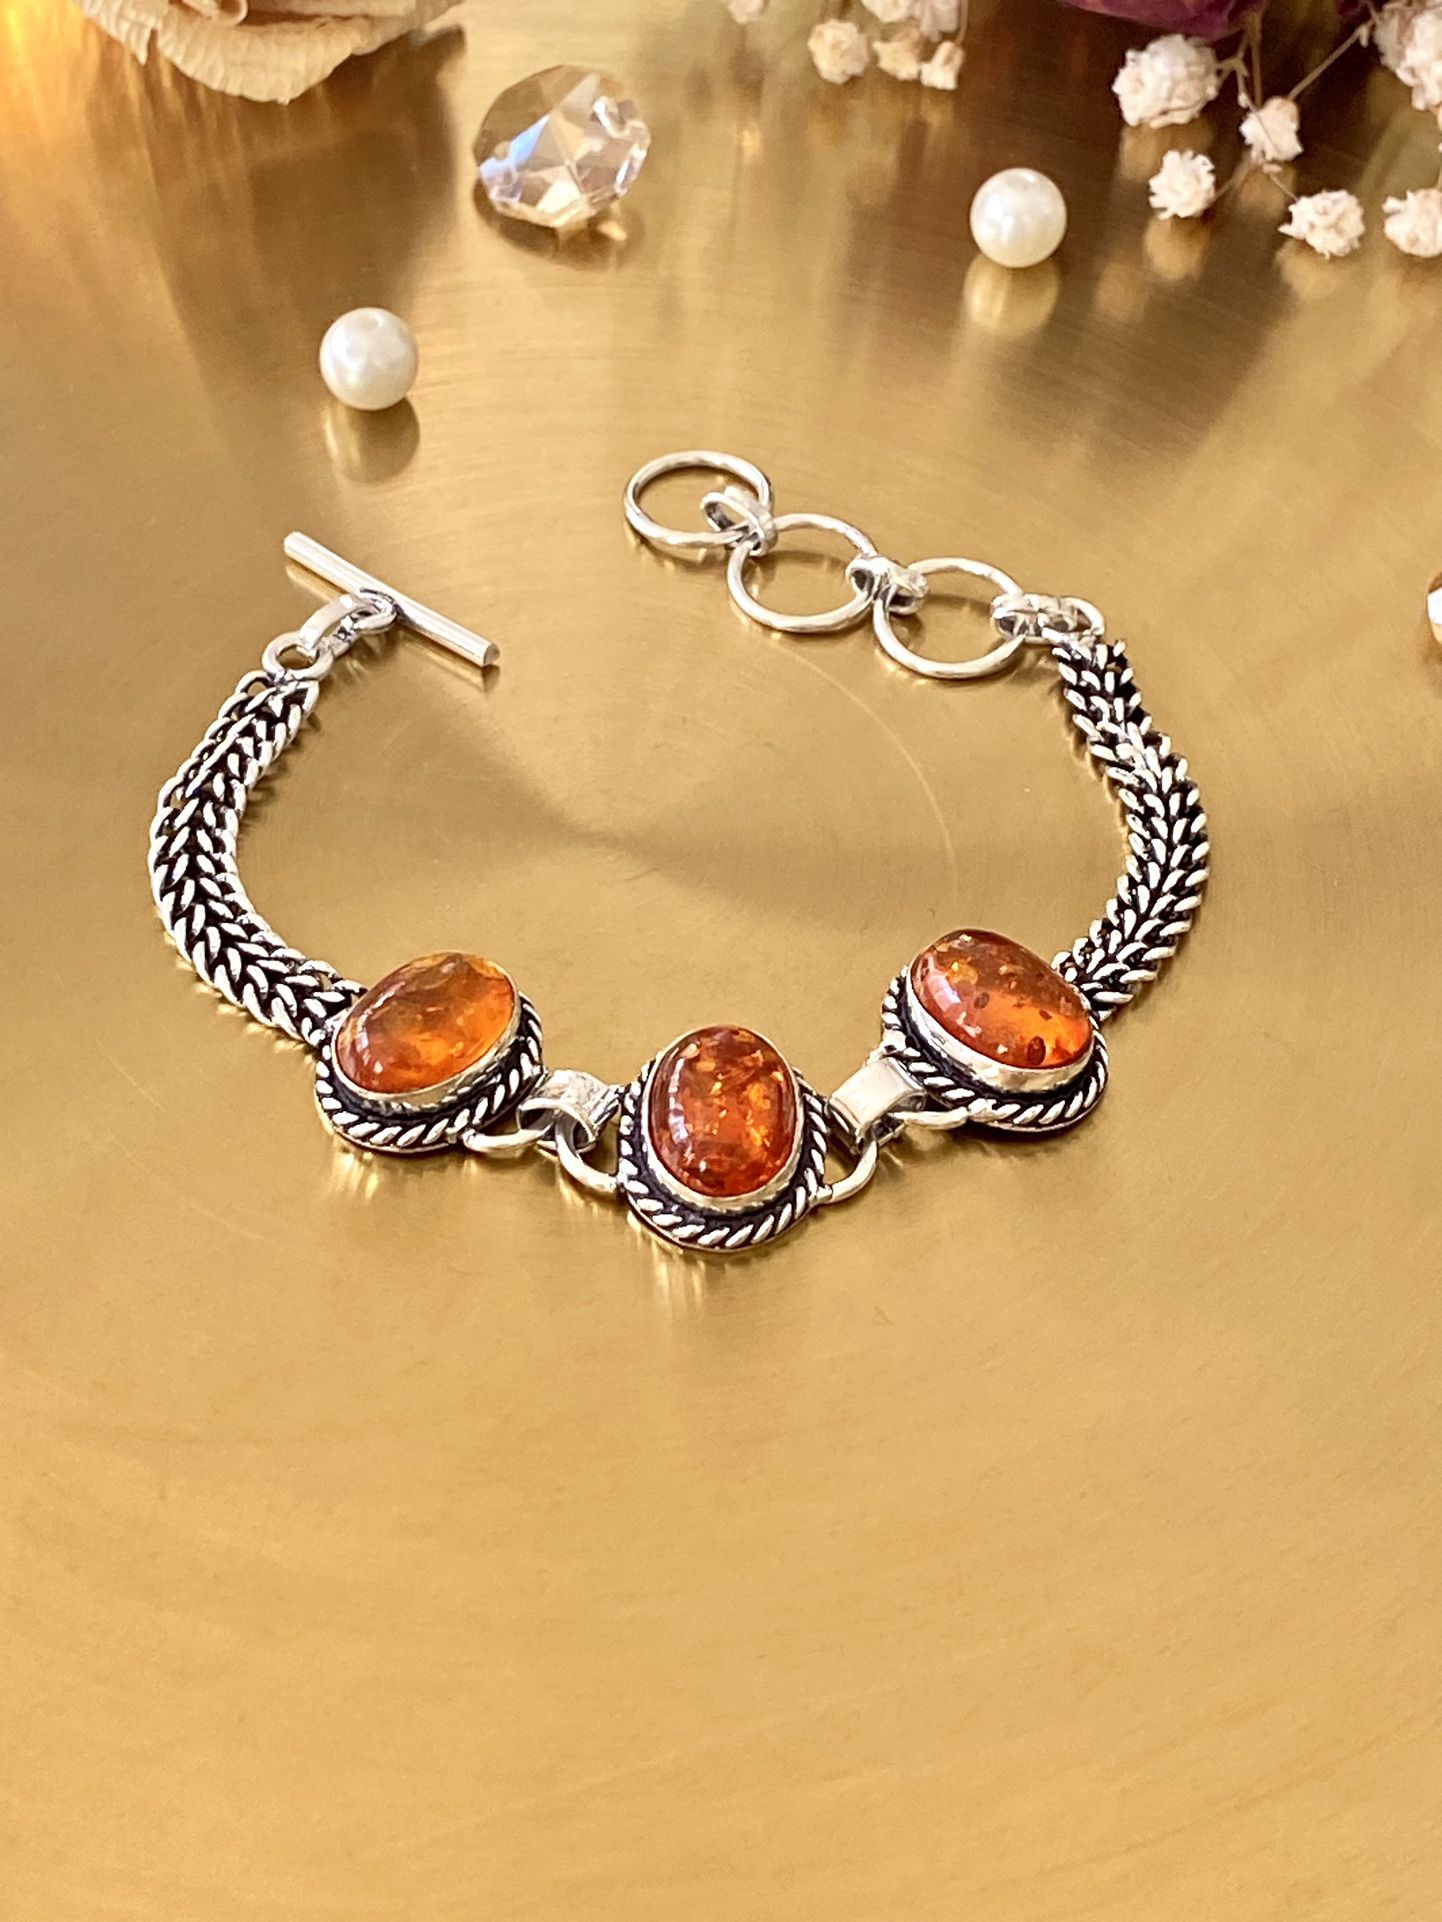 Baltic Amber 925 Sterling Silver Overlay Handcrafted Bali Style Bracelet